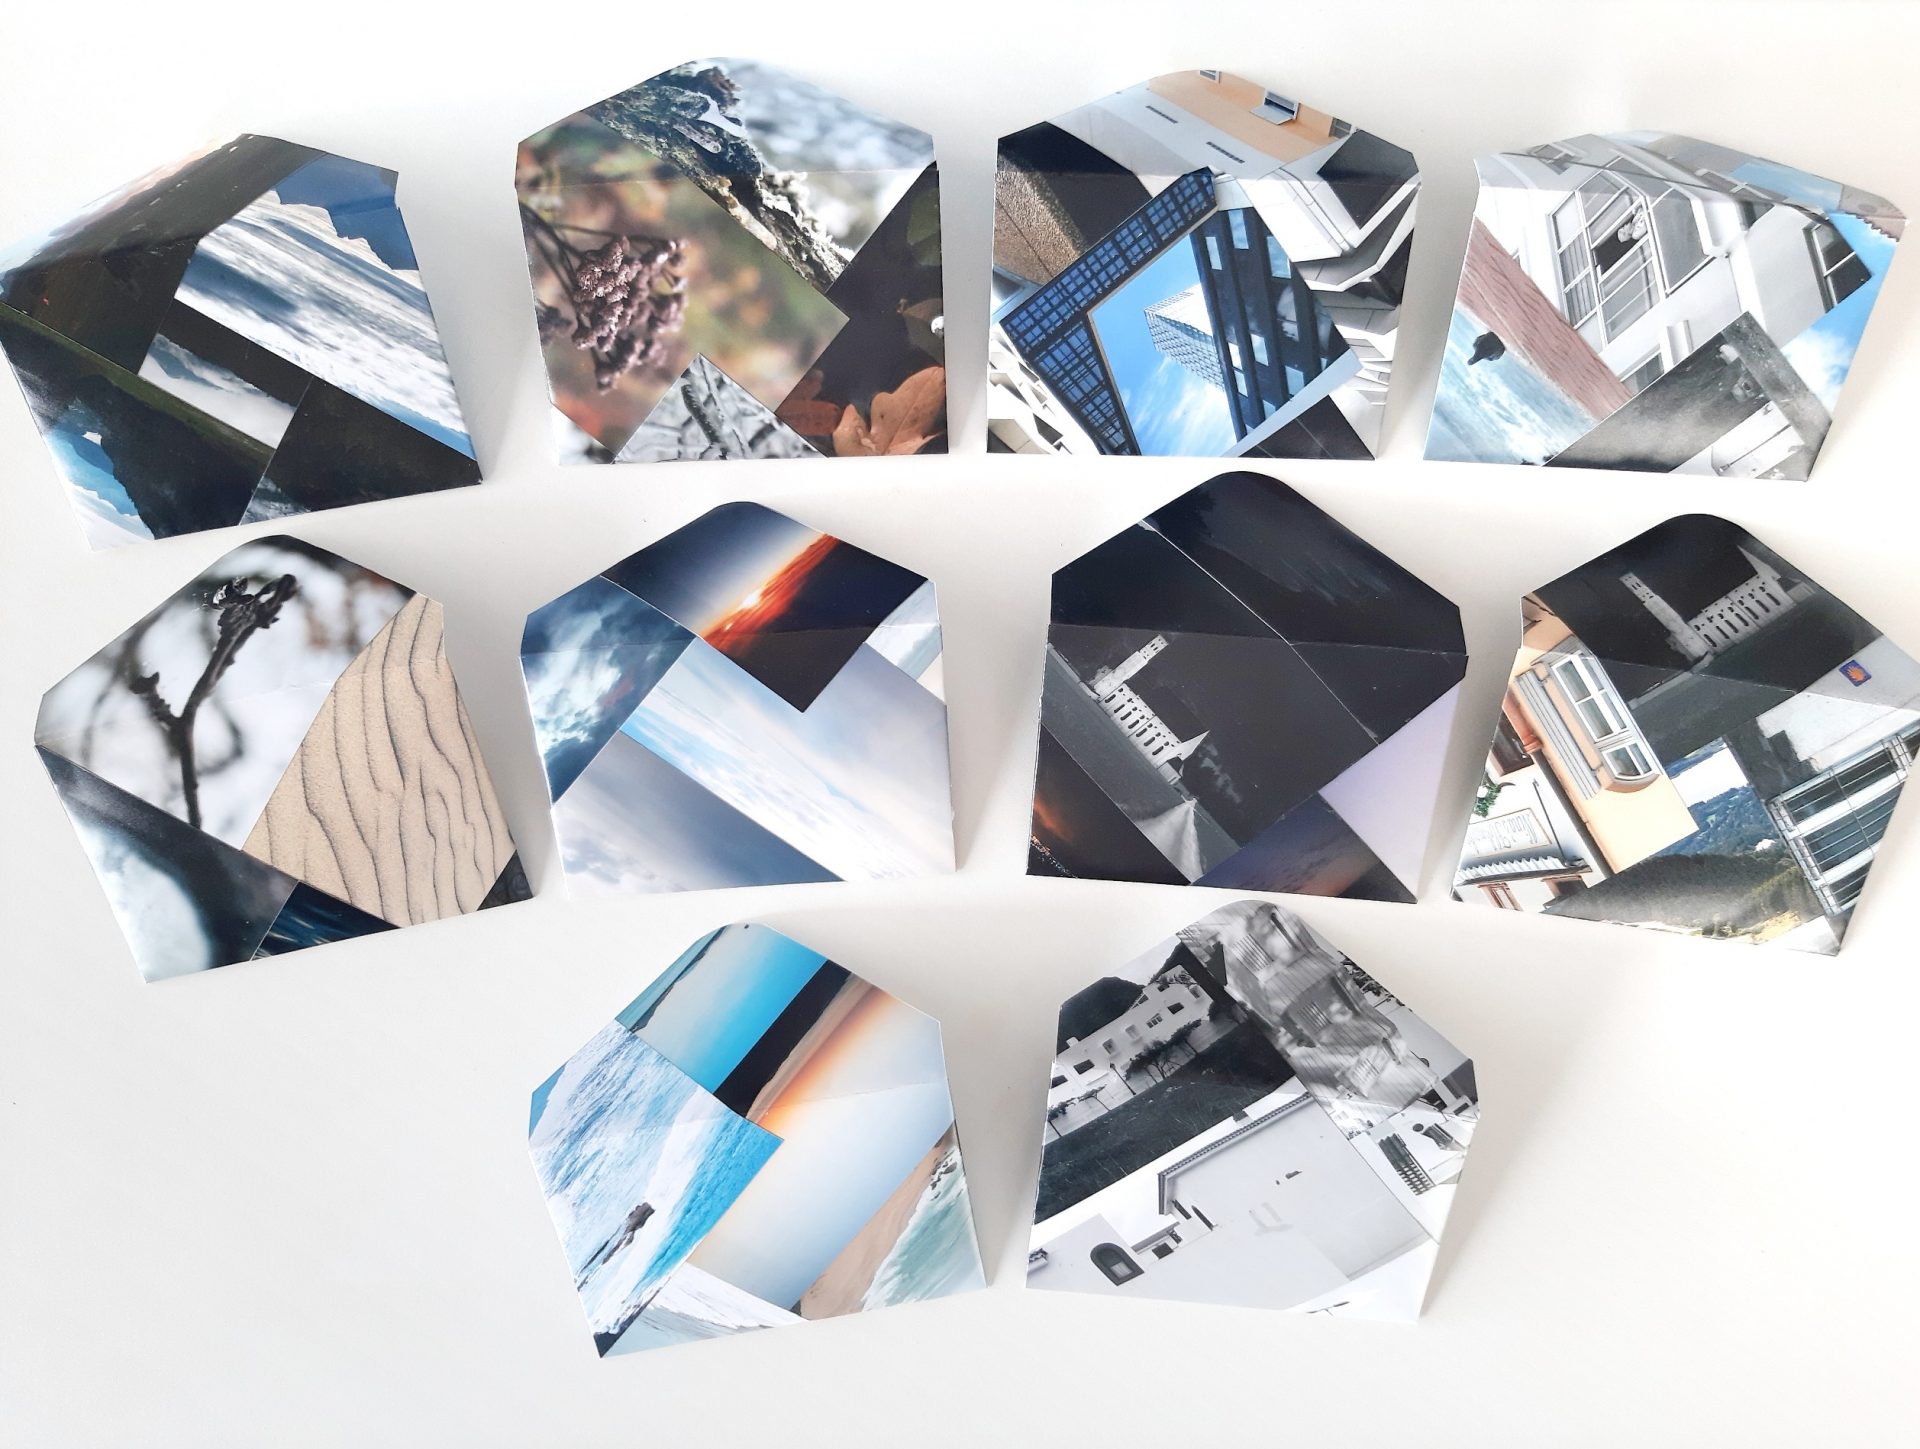 10 enveloppes made from upcycled discarded photos - seen from the back